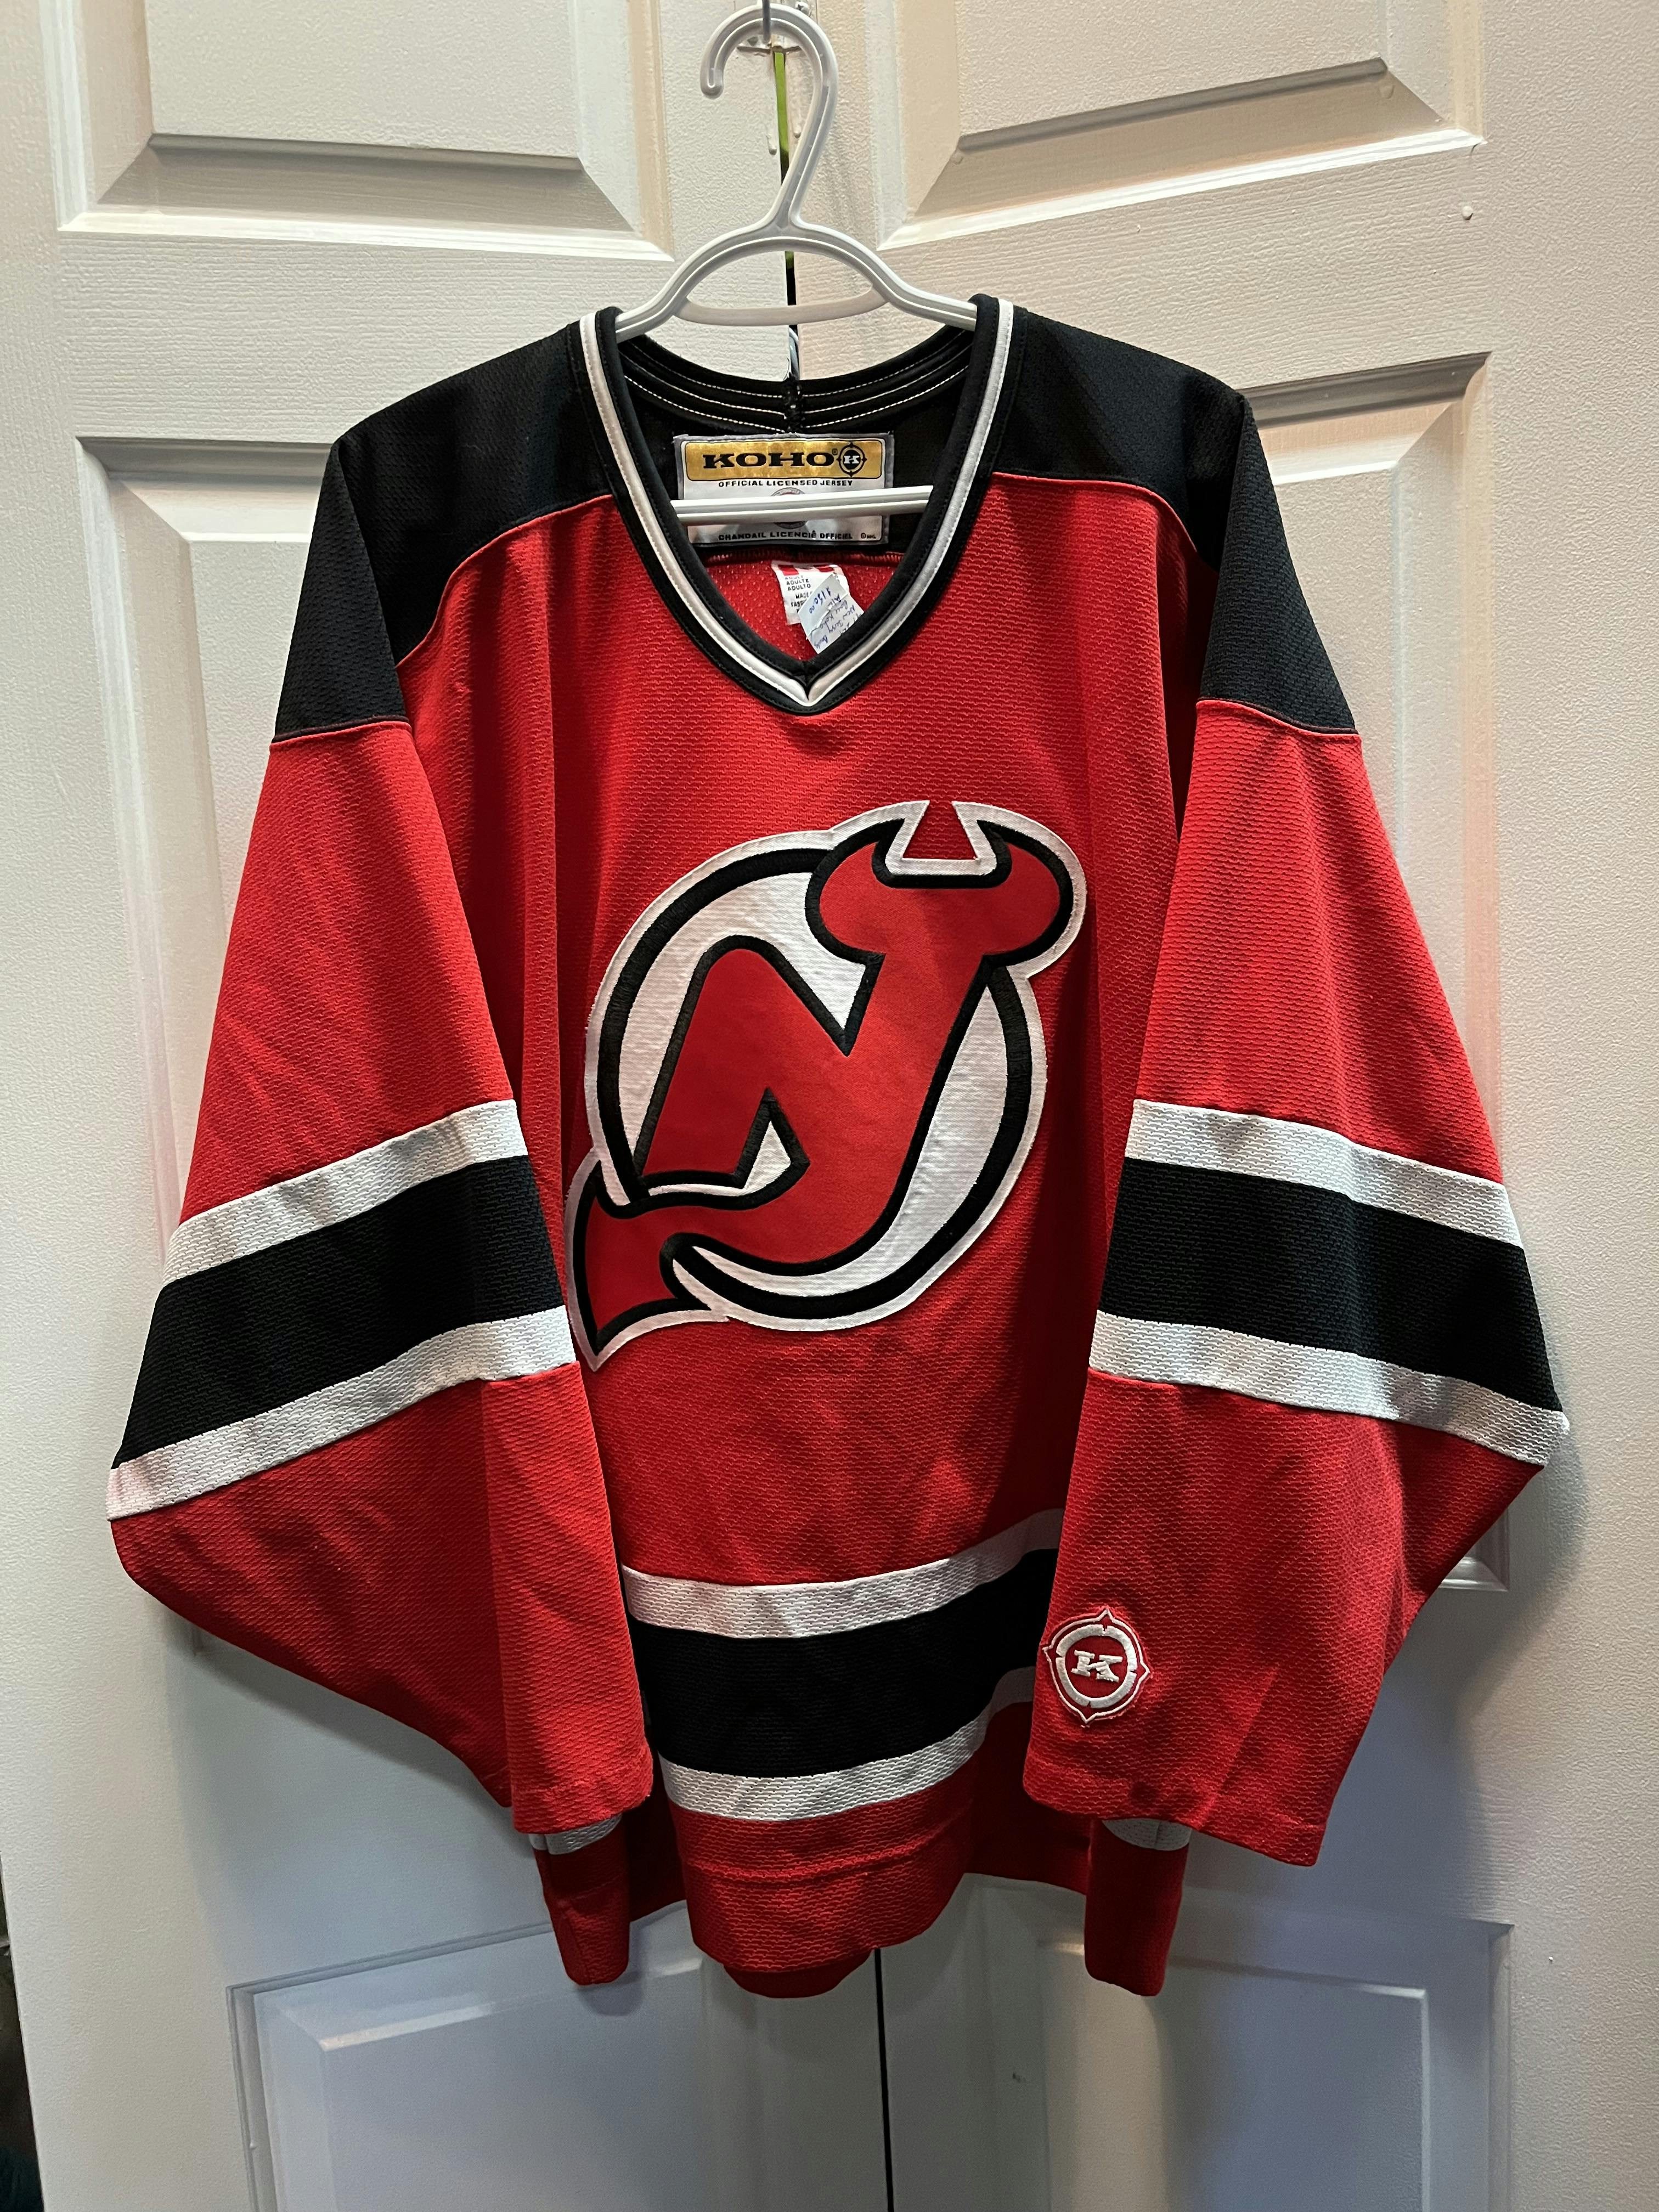 New Jersey Devils Jerseys  New, Preowned, and Vintage